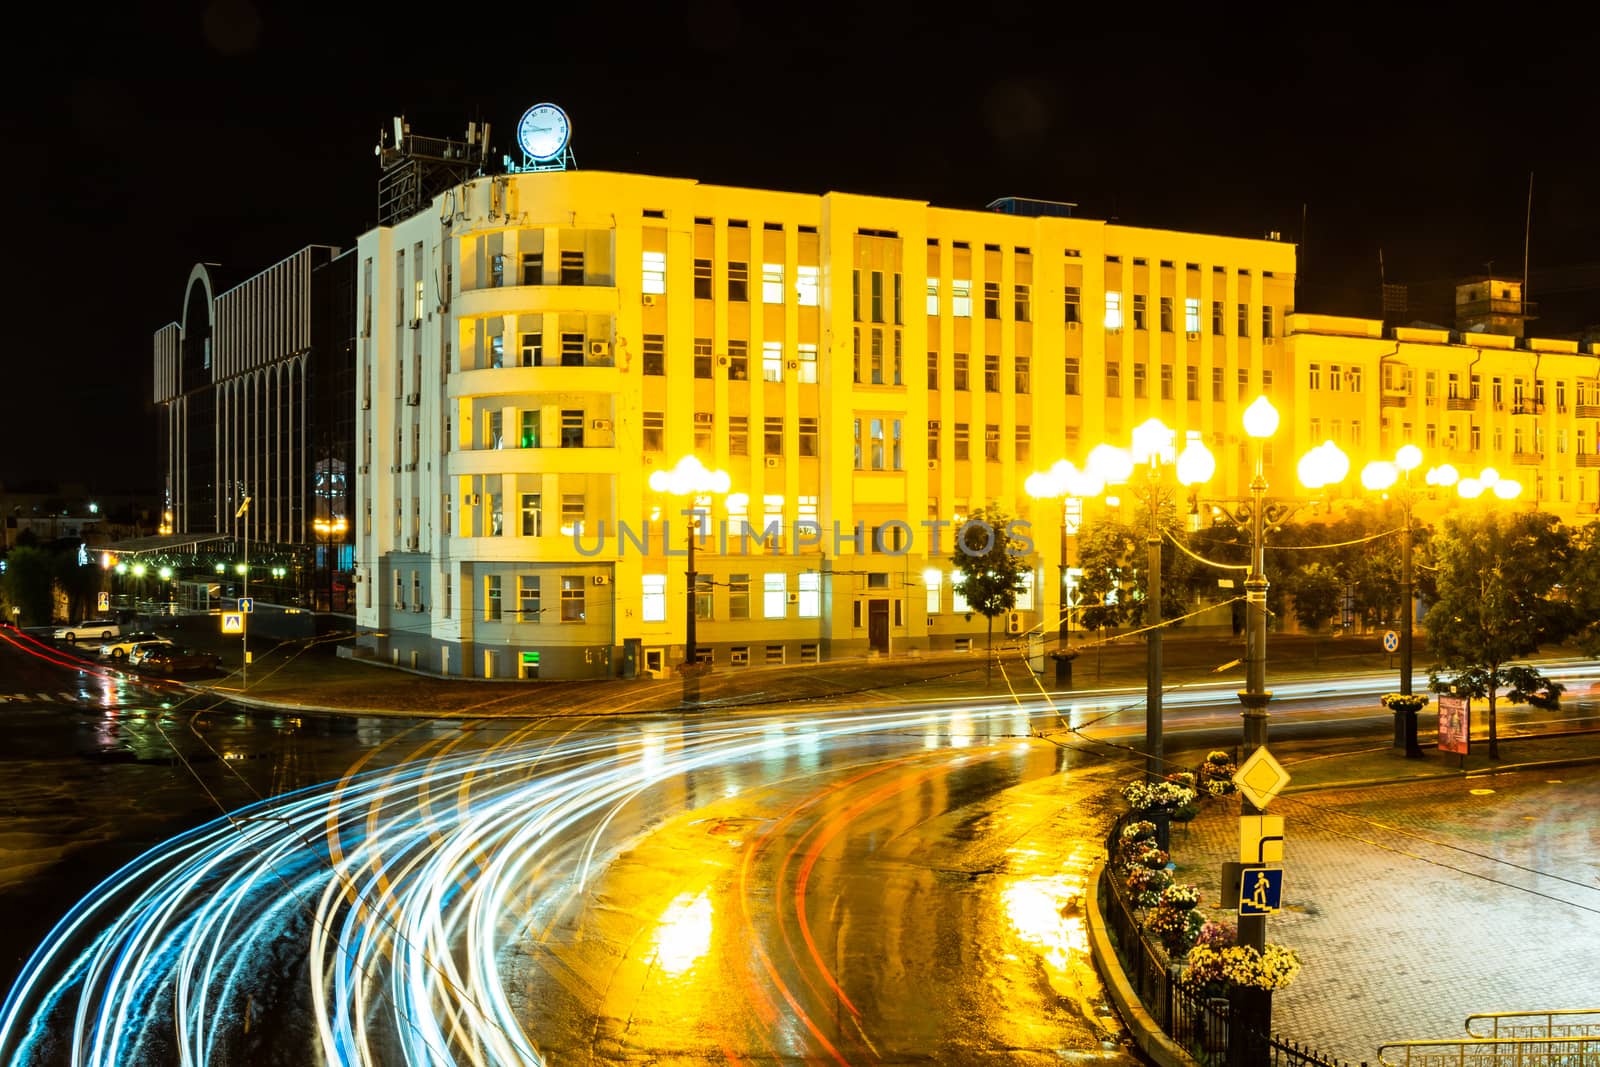 Night city landscape. The main square of the city of Khabarovsk in the light of lanterns, which are reflected in puddles after the rain just passed.